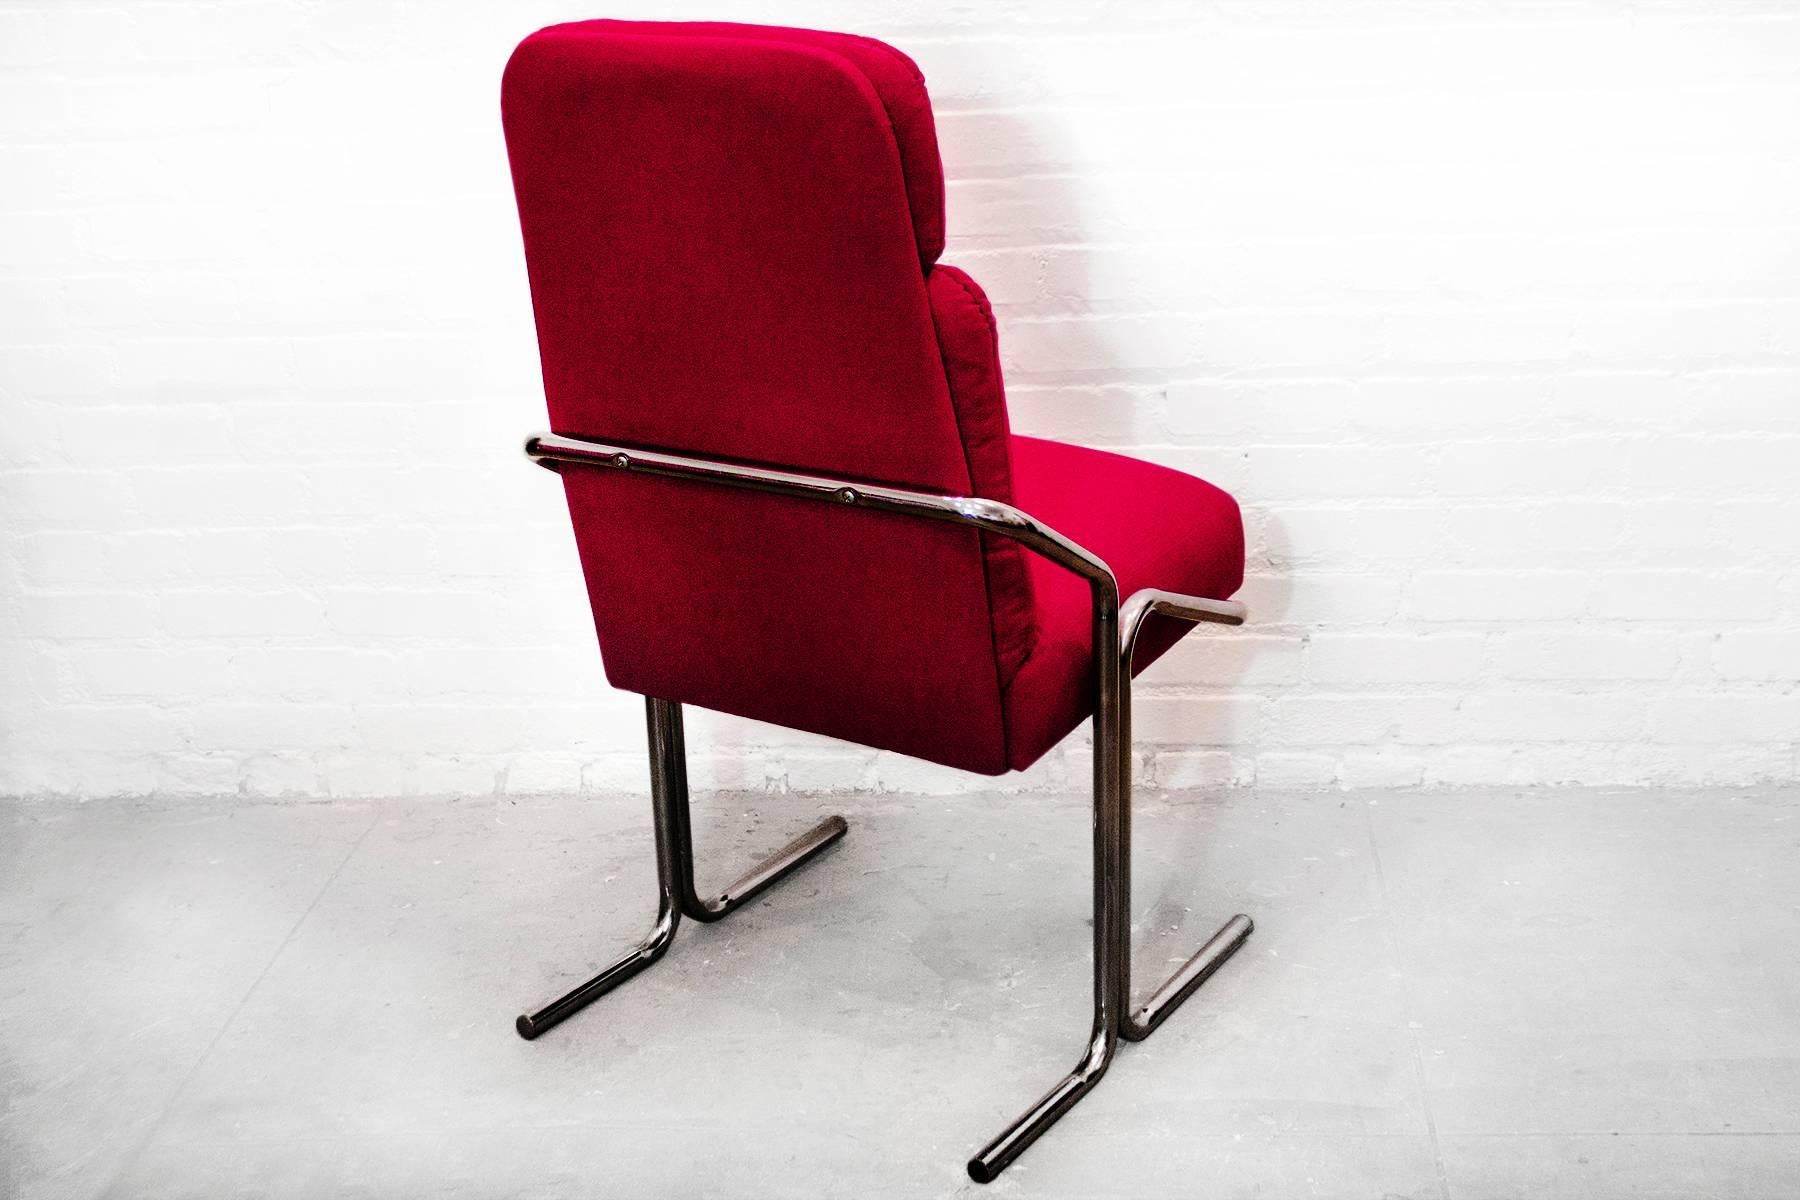 Rare high back model of the Douglas of California chrome tube lounge chair. Great Mid-Century Modern Classic has been reupholstered in a crimson red micro-linen fabric. Chrome repolished. Good vintage condition. 

Dimensions: 23